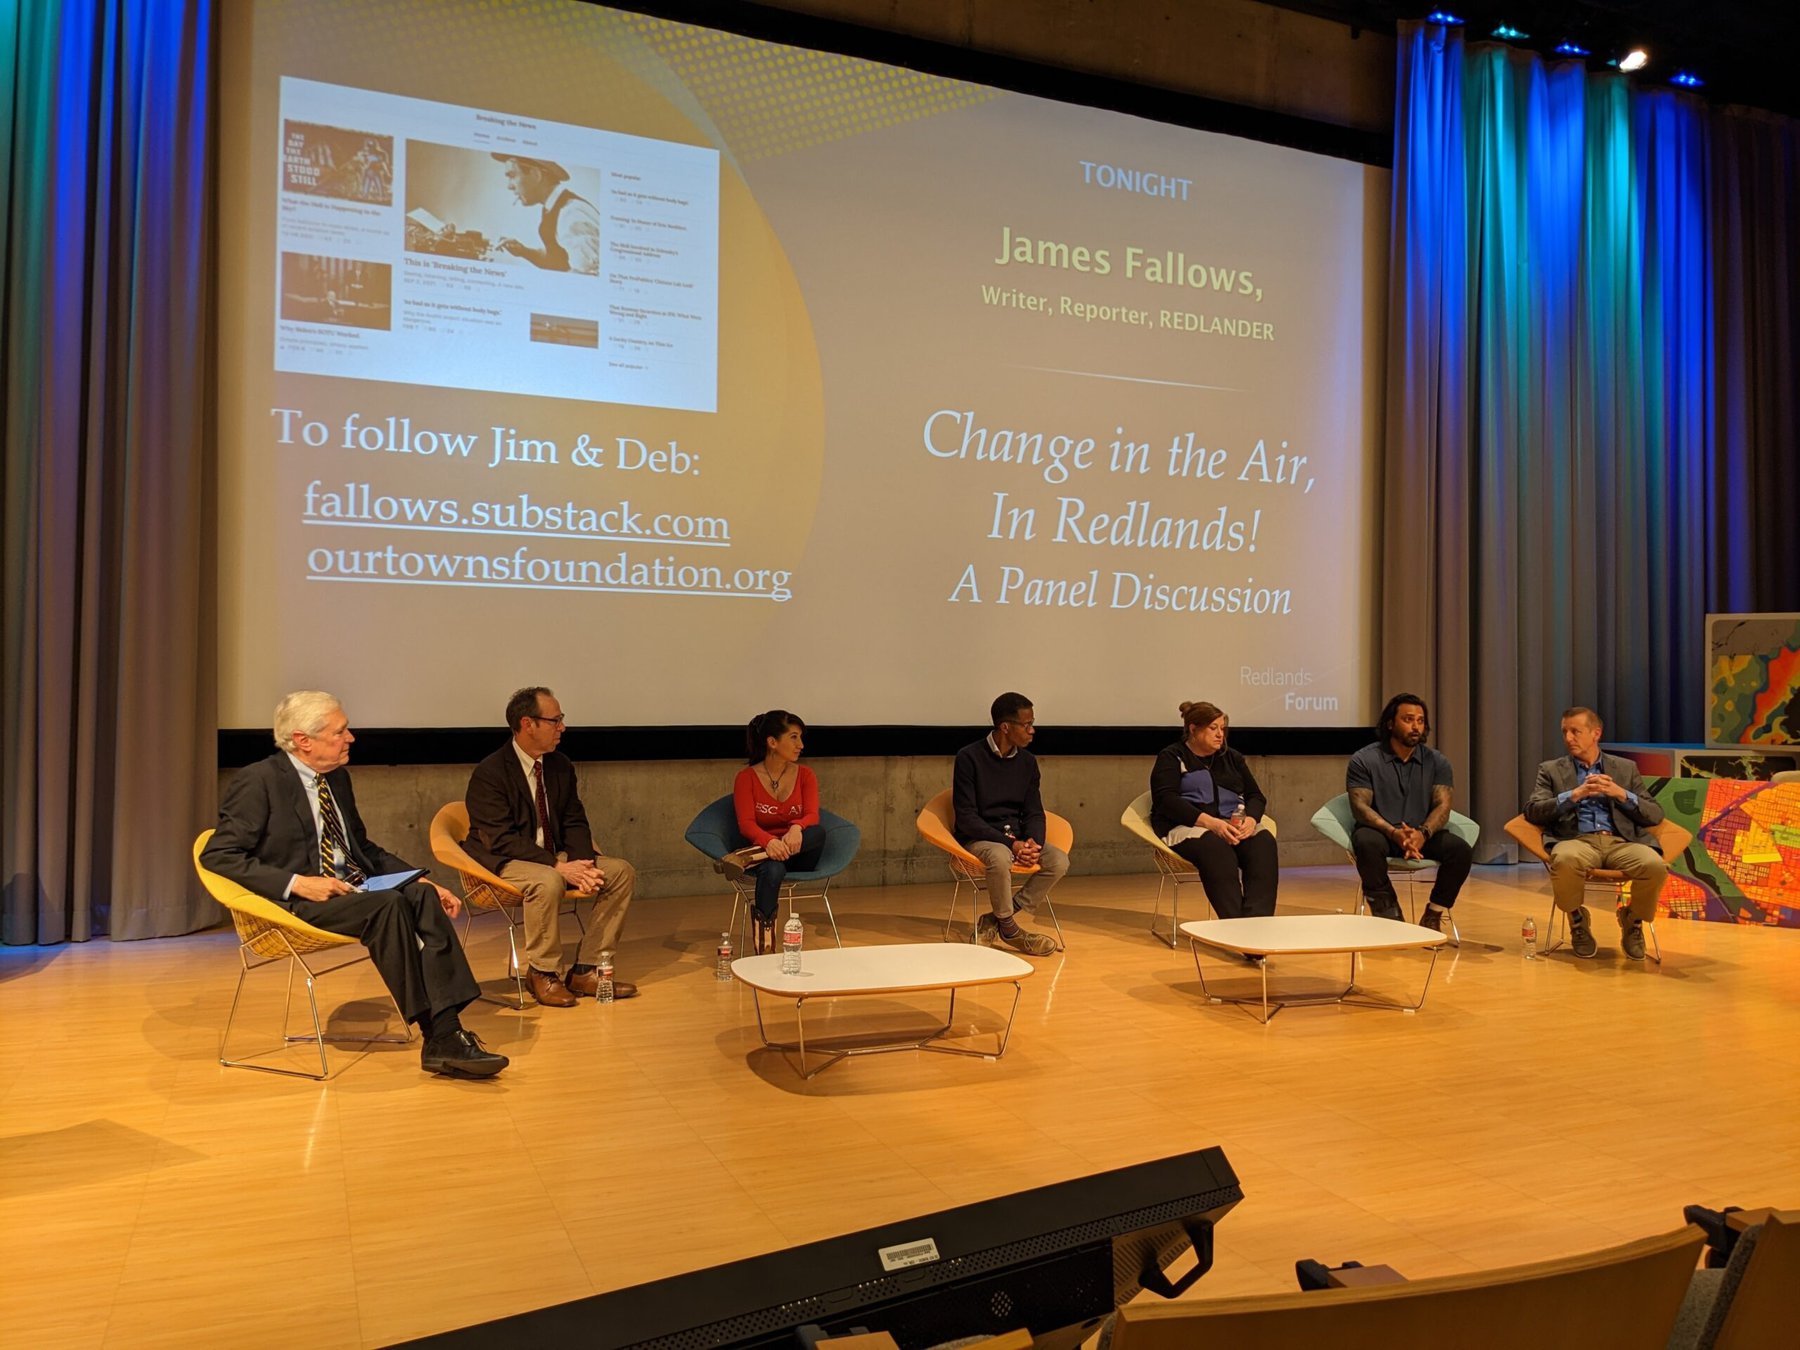 Seven people sitting on stage for a panel discussion.